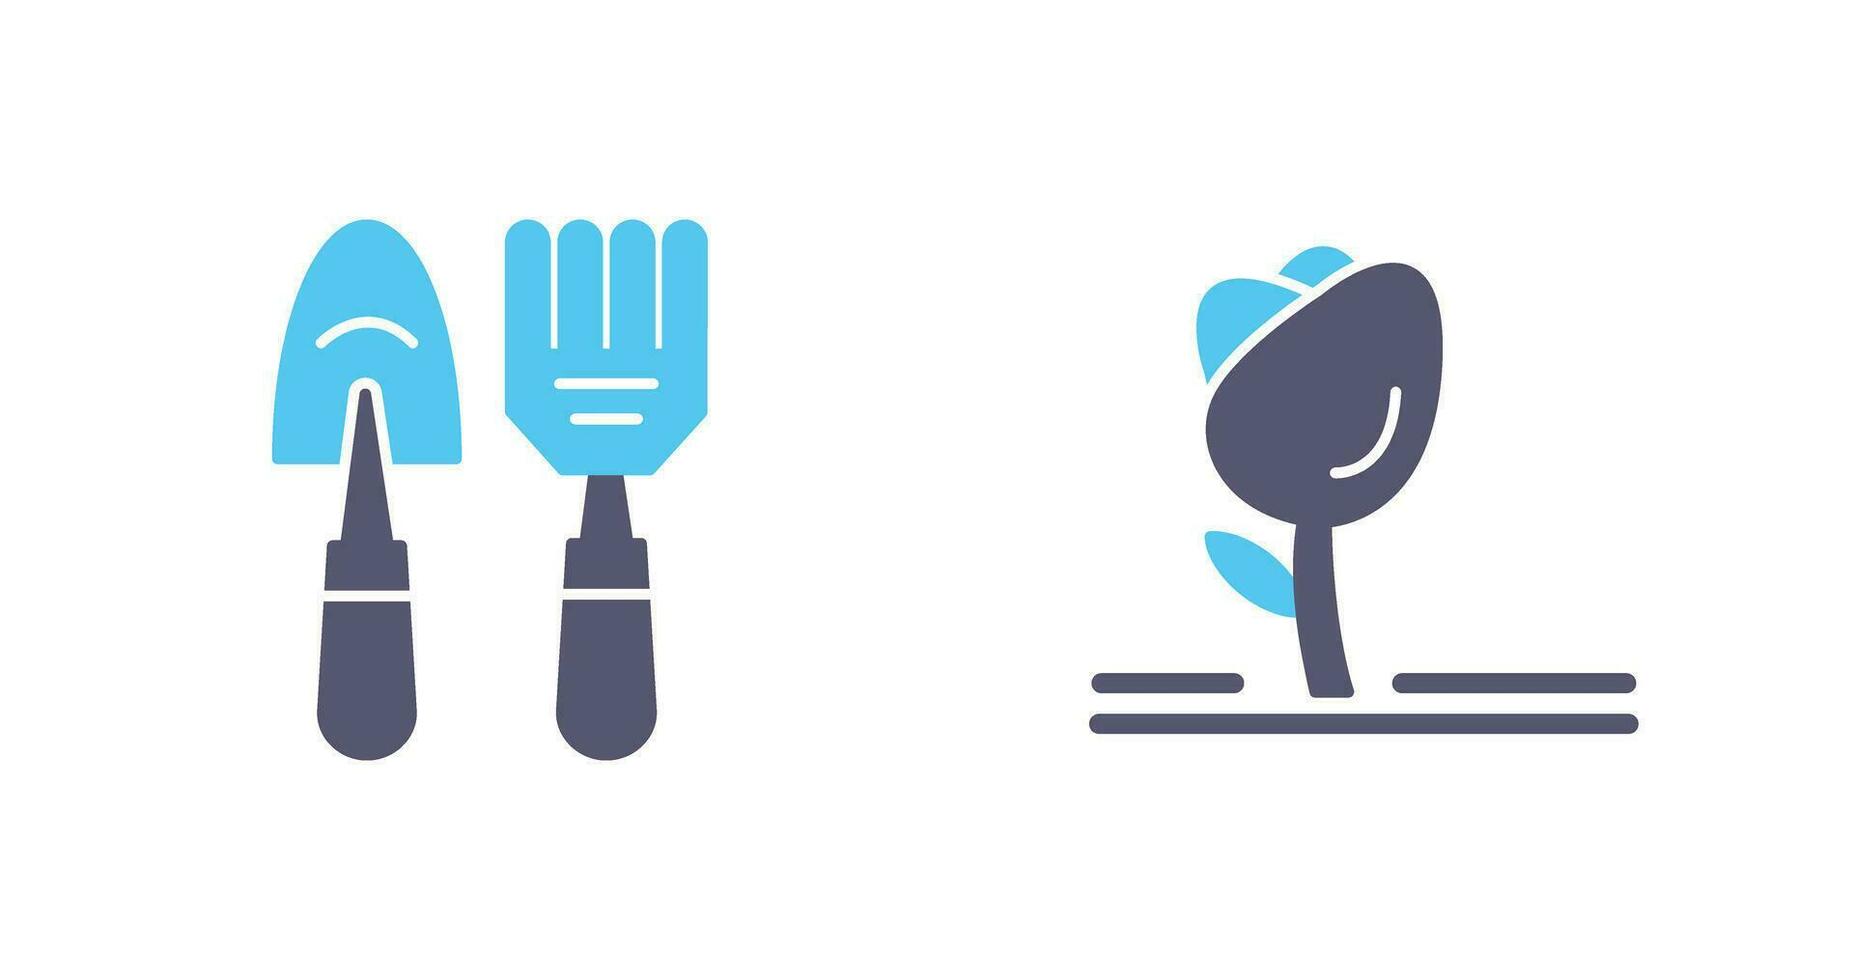 Gardening Tools and Tulip Icon vector